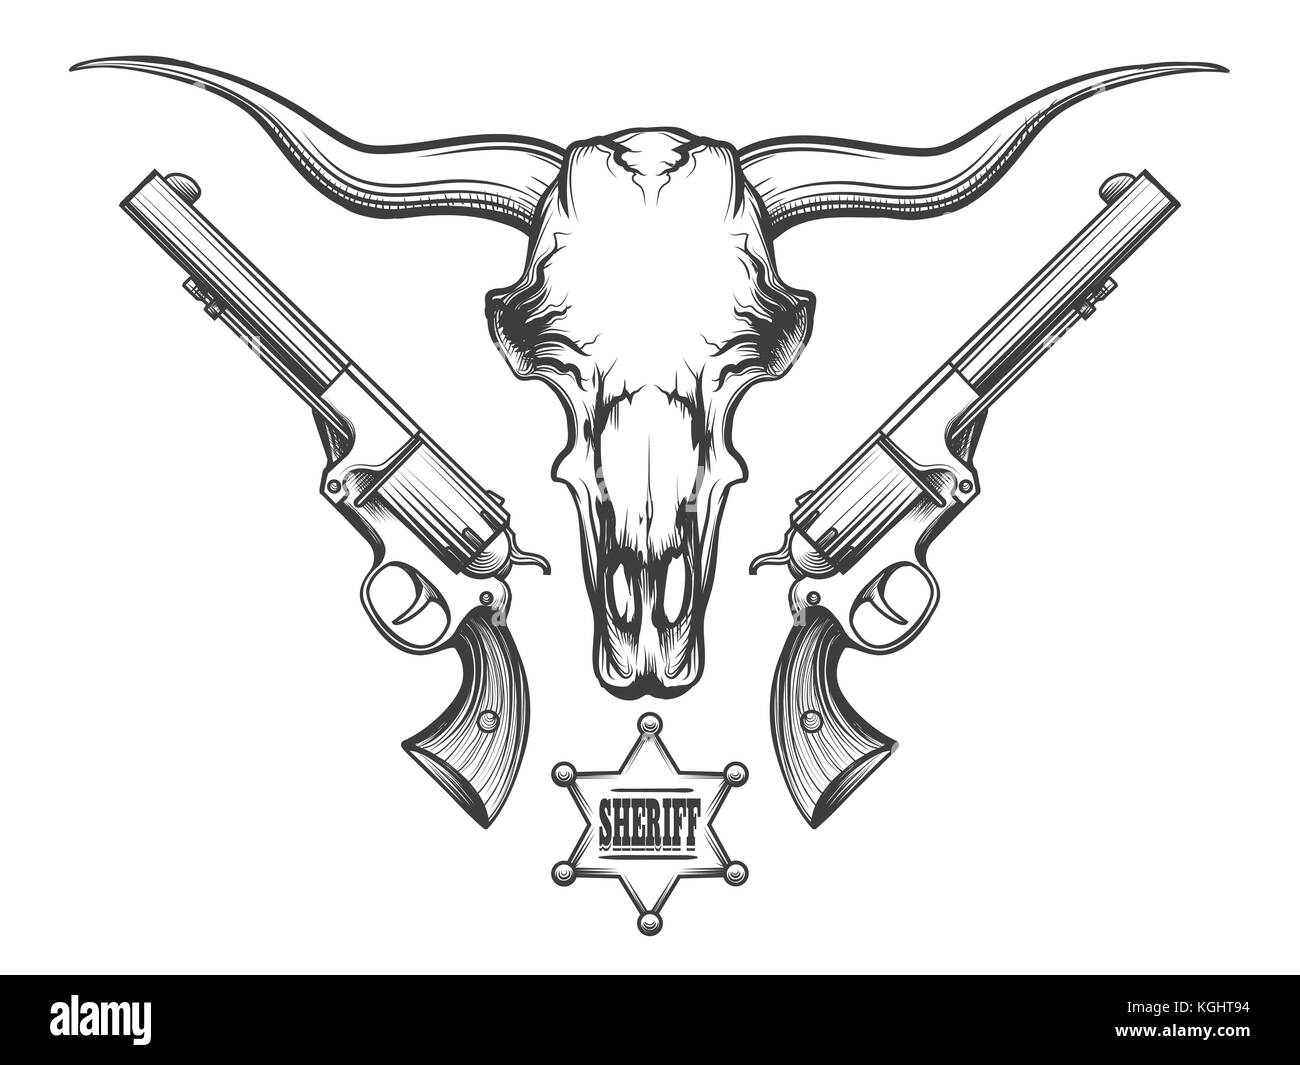 Bison skull with pair of revolvers and sheriff badge drawn in engraving style. Vector illustration. Stock Vector